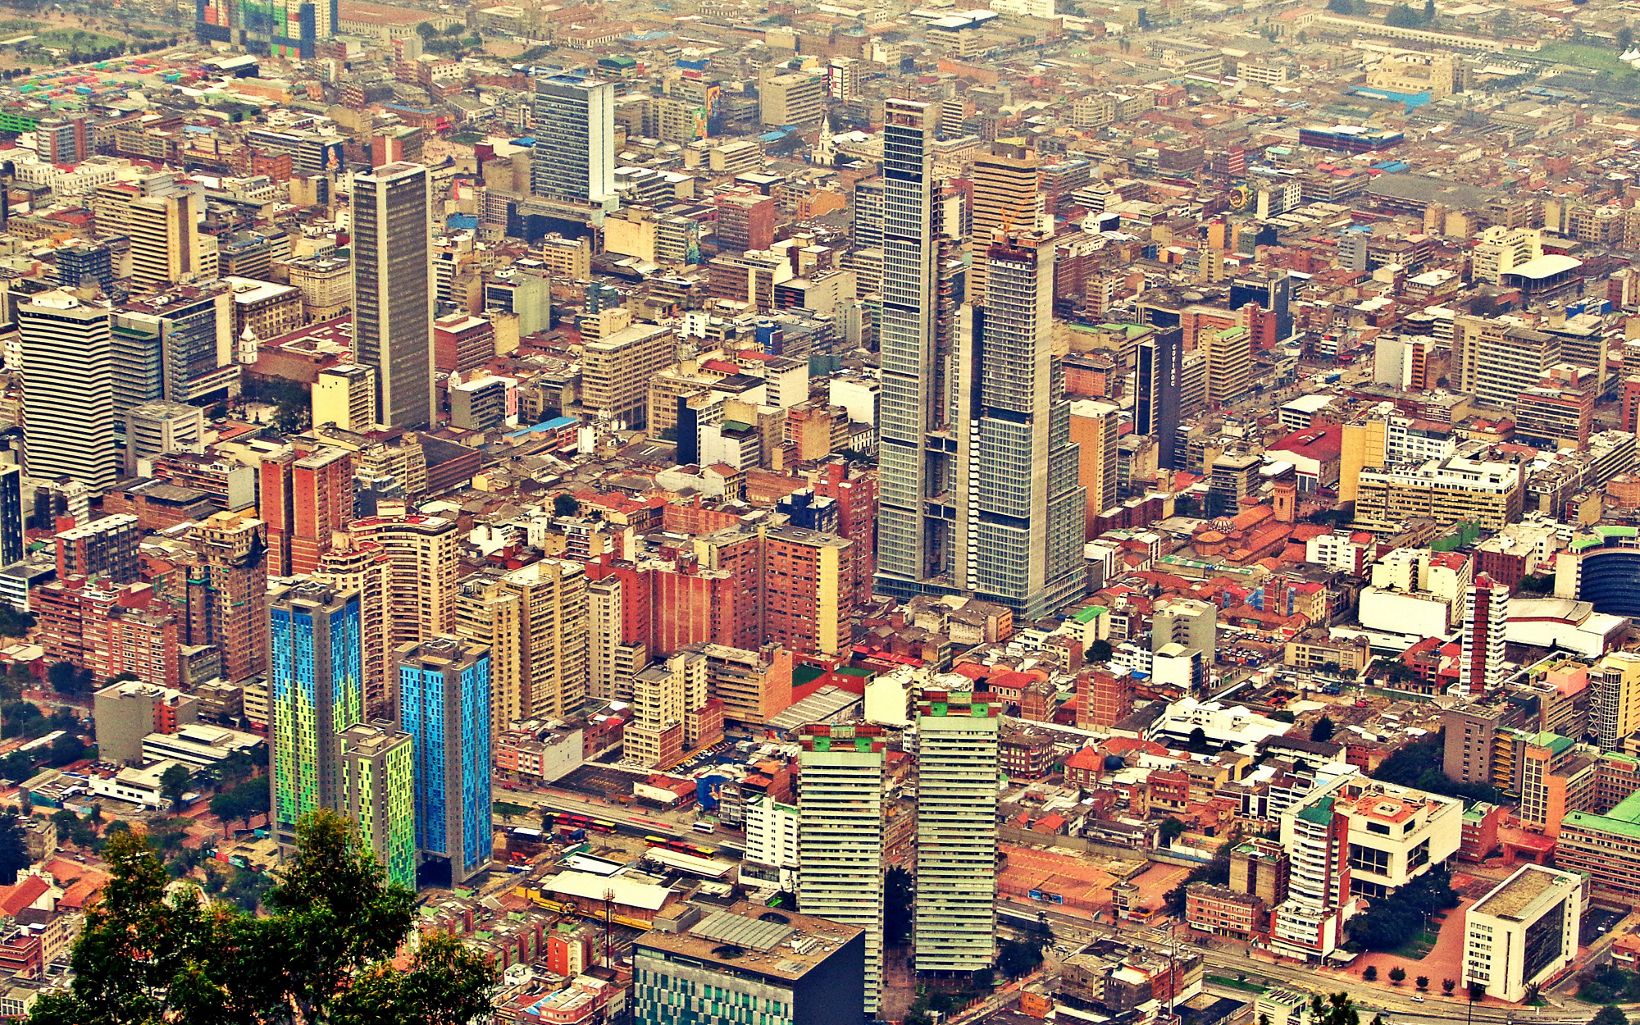 Bogota is the capital (city) of Colombia. As of 2009, more than 7 million people live in Bogota, which makes it the largest city in Colombia